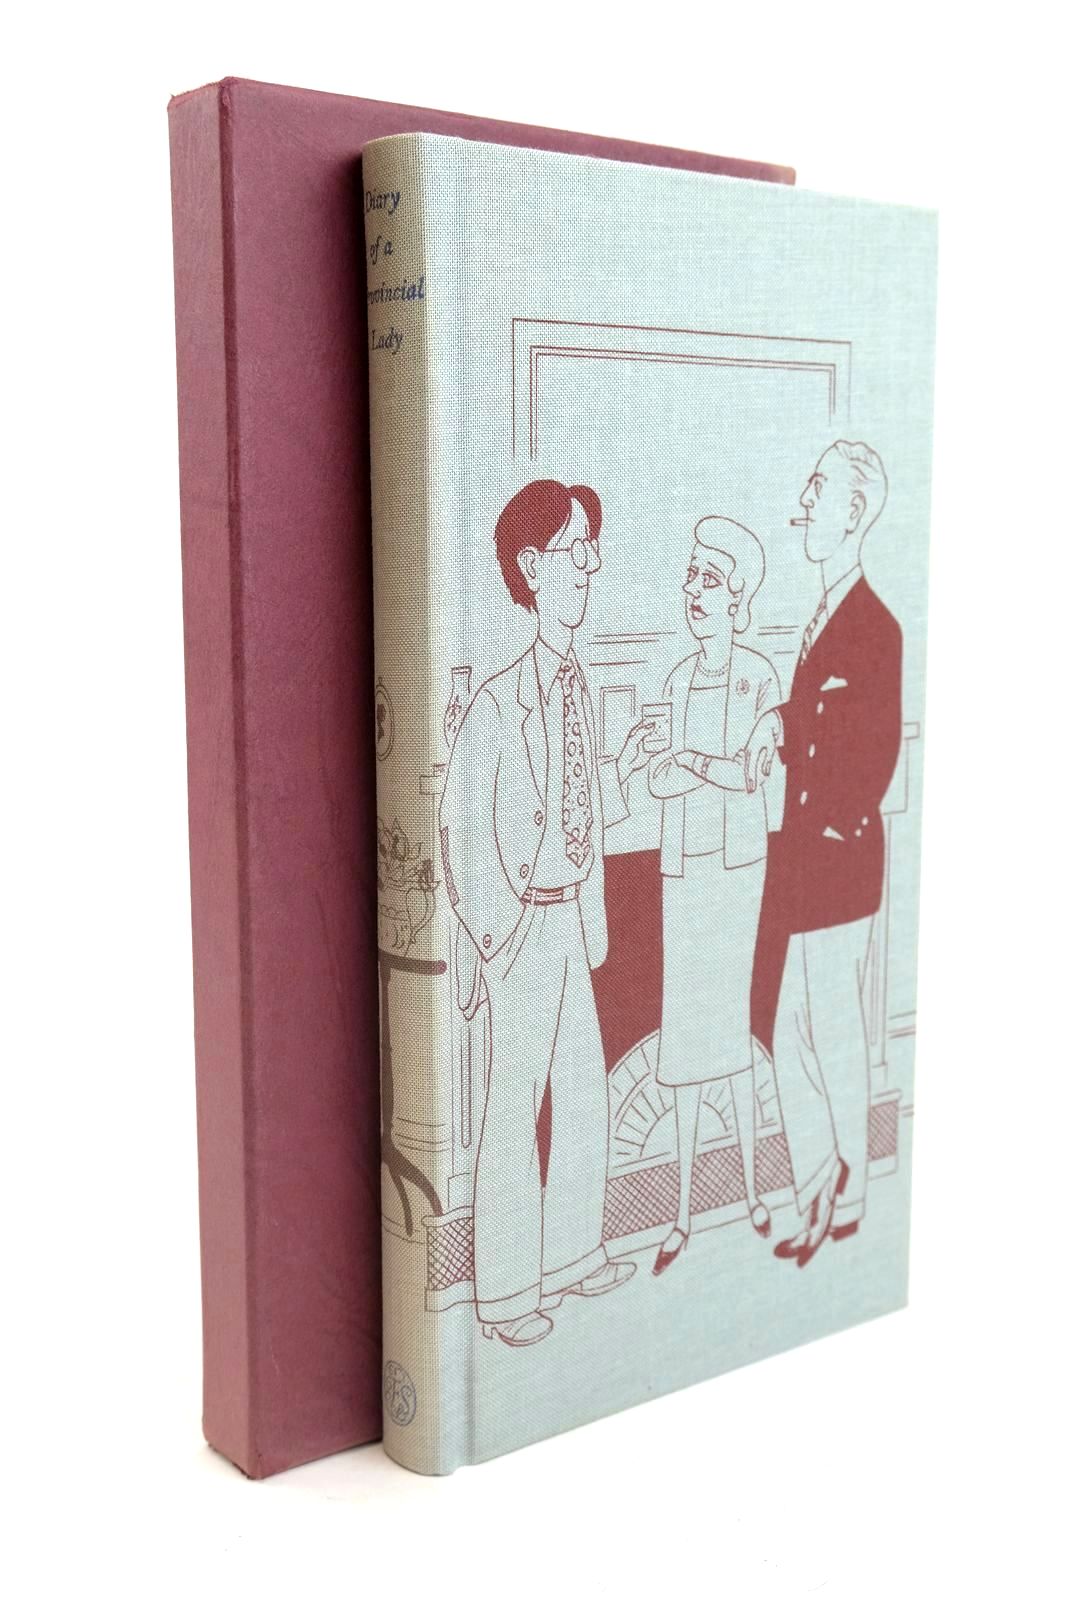 Photo of DIARY OF A PROVINCIAL LADY written by Delafield, E.M. Cooper, Jilly illustrated by Bentley, Nicolas published by Folio Society (STOCK CODE: 1320033)  for sale by Stella & Rose's Books